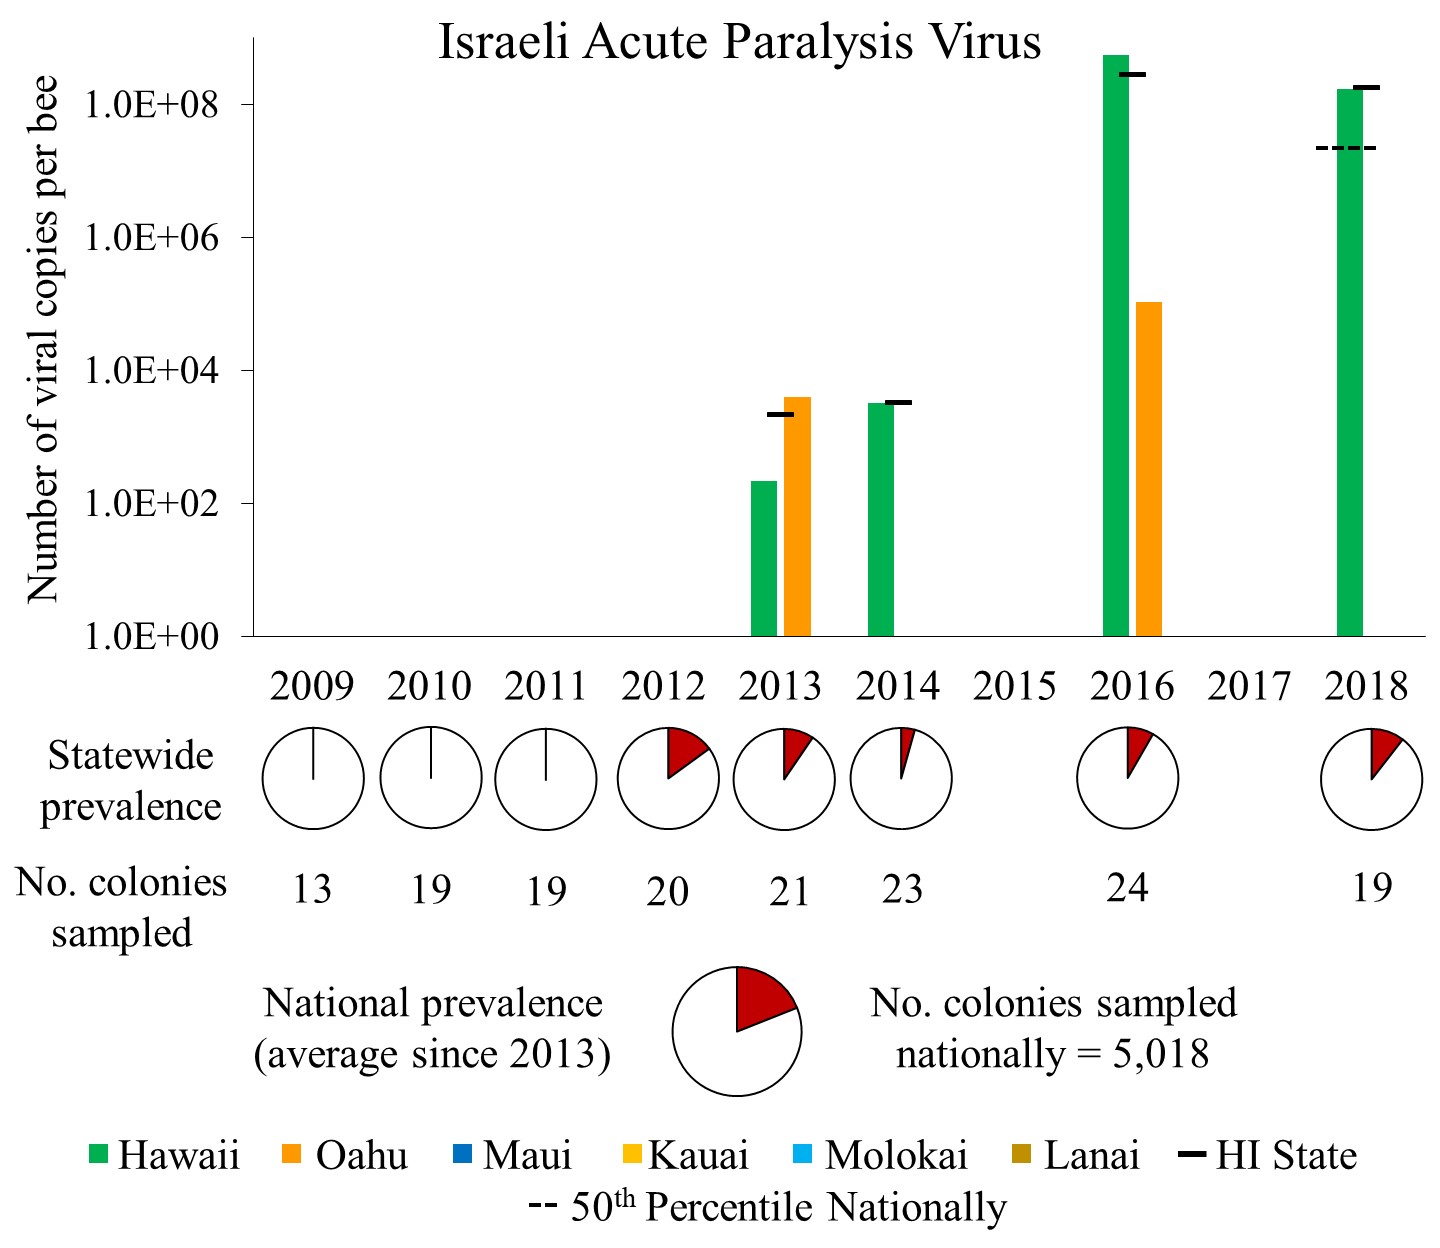 IAPV infection prevalence in Hawaii